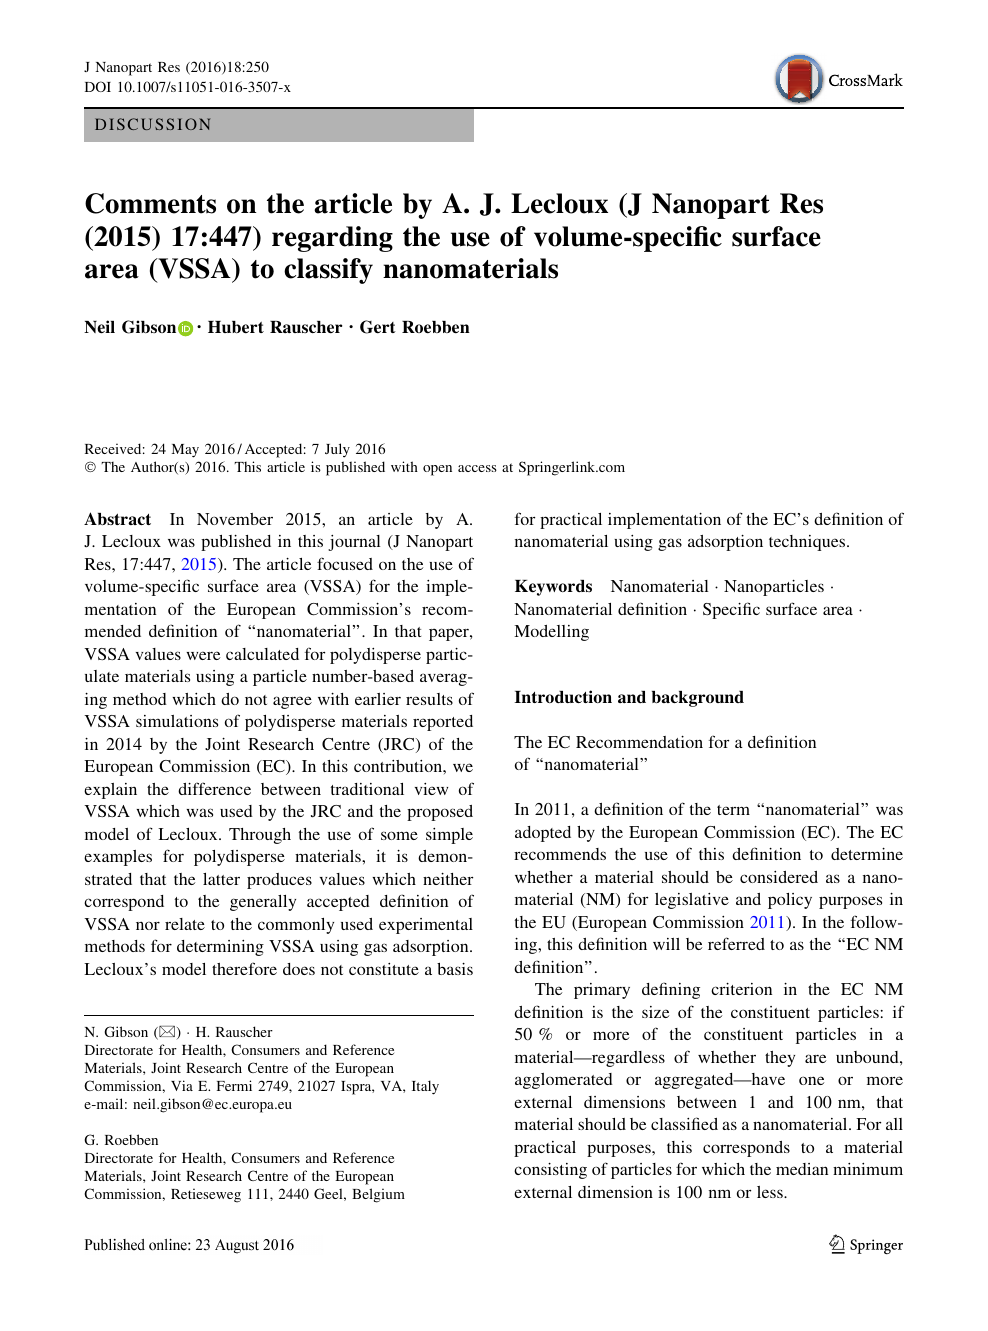 Comments On The Article By A J Lecloux J Nanopart Res 15 17 447 Regarding The Use Of Volume Specific Surface Area Vssa To Classify Nanomaterials Topic Of Research Paper In Physical Sciences